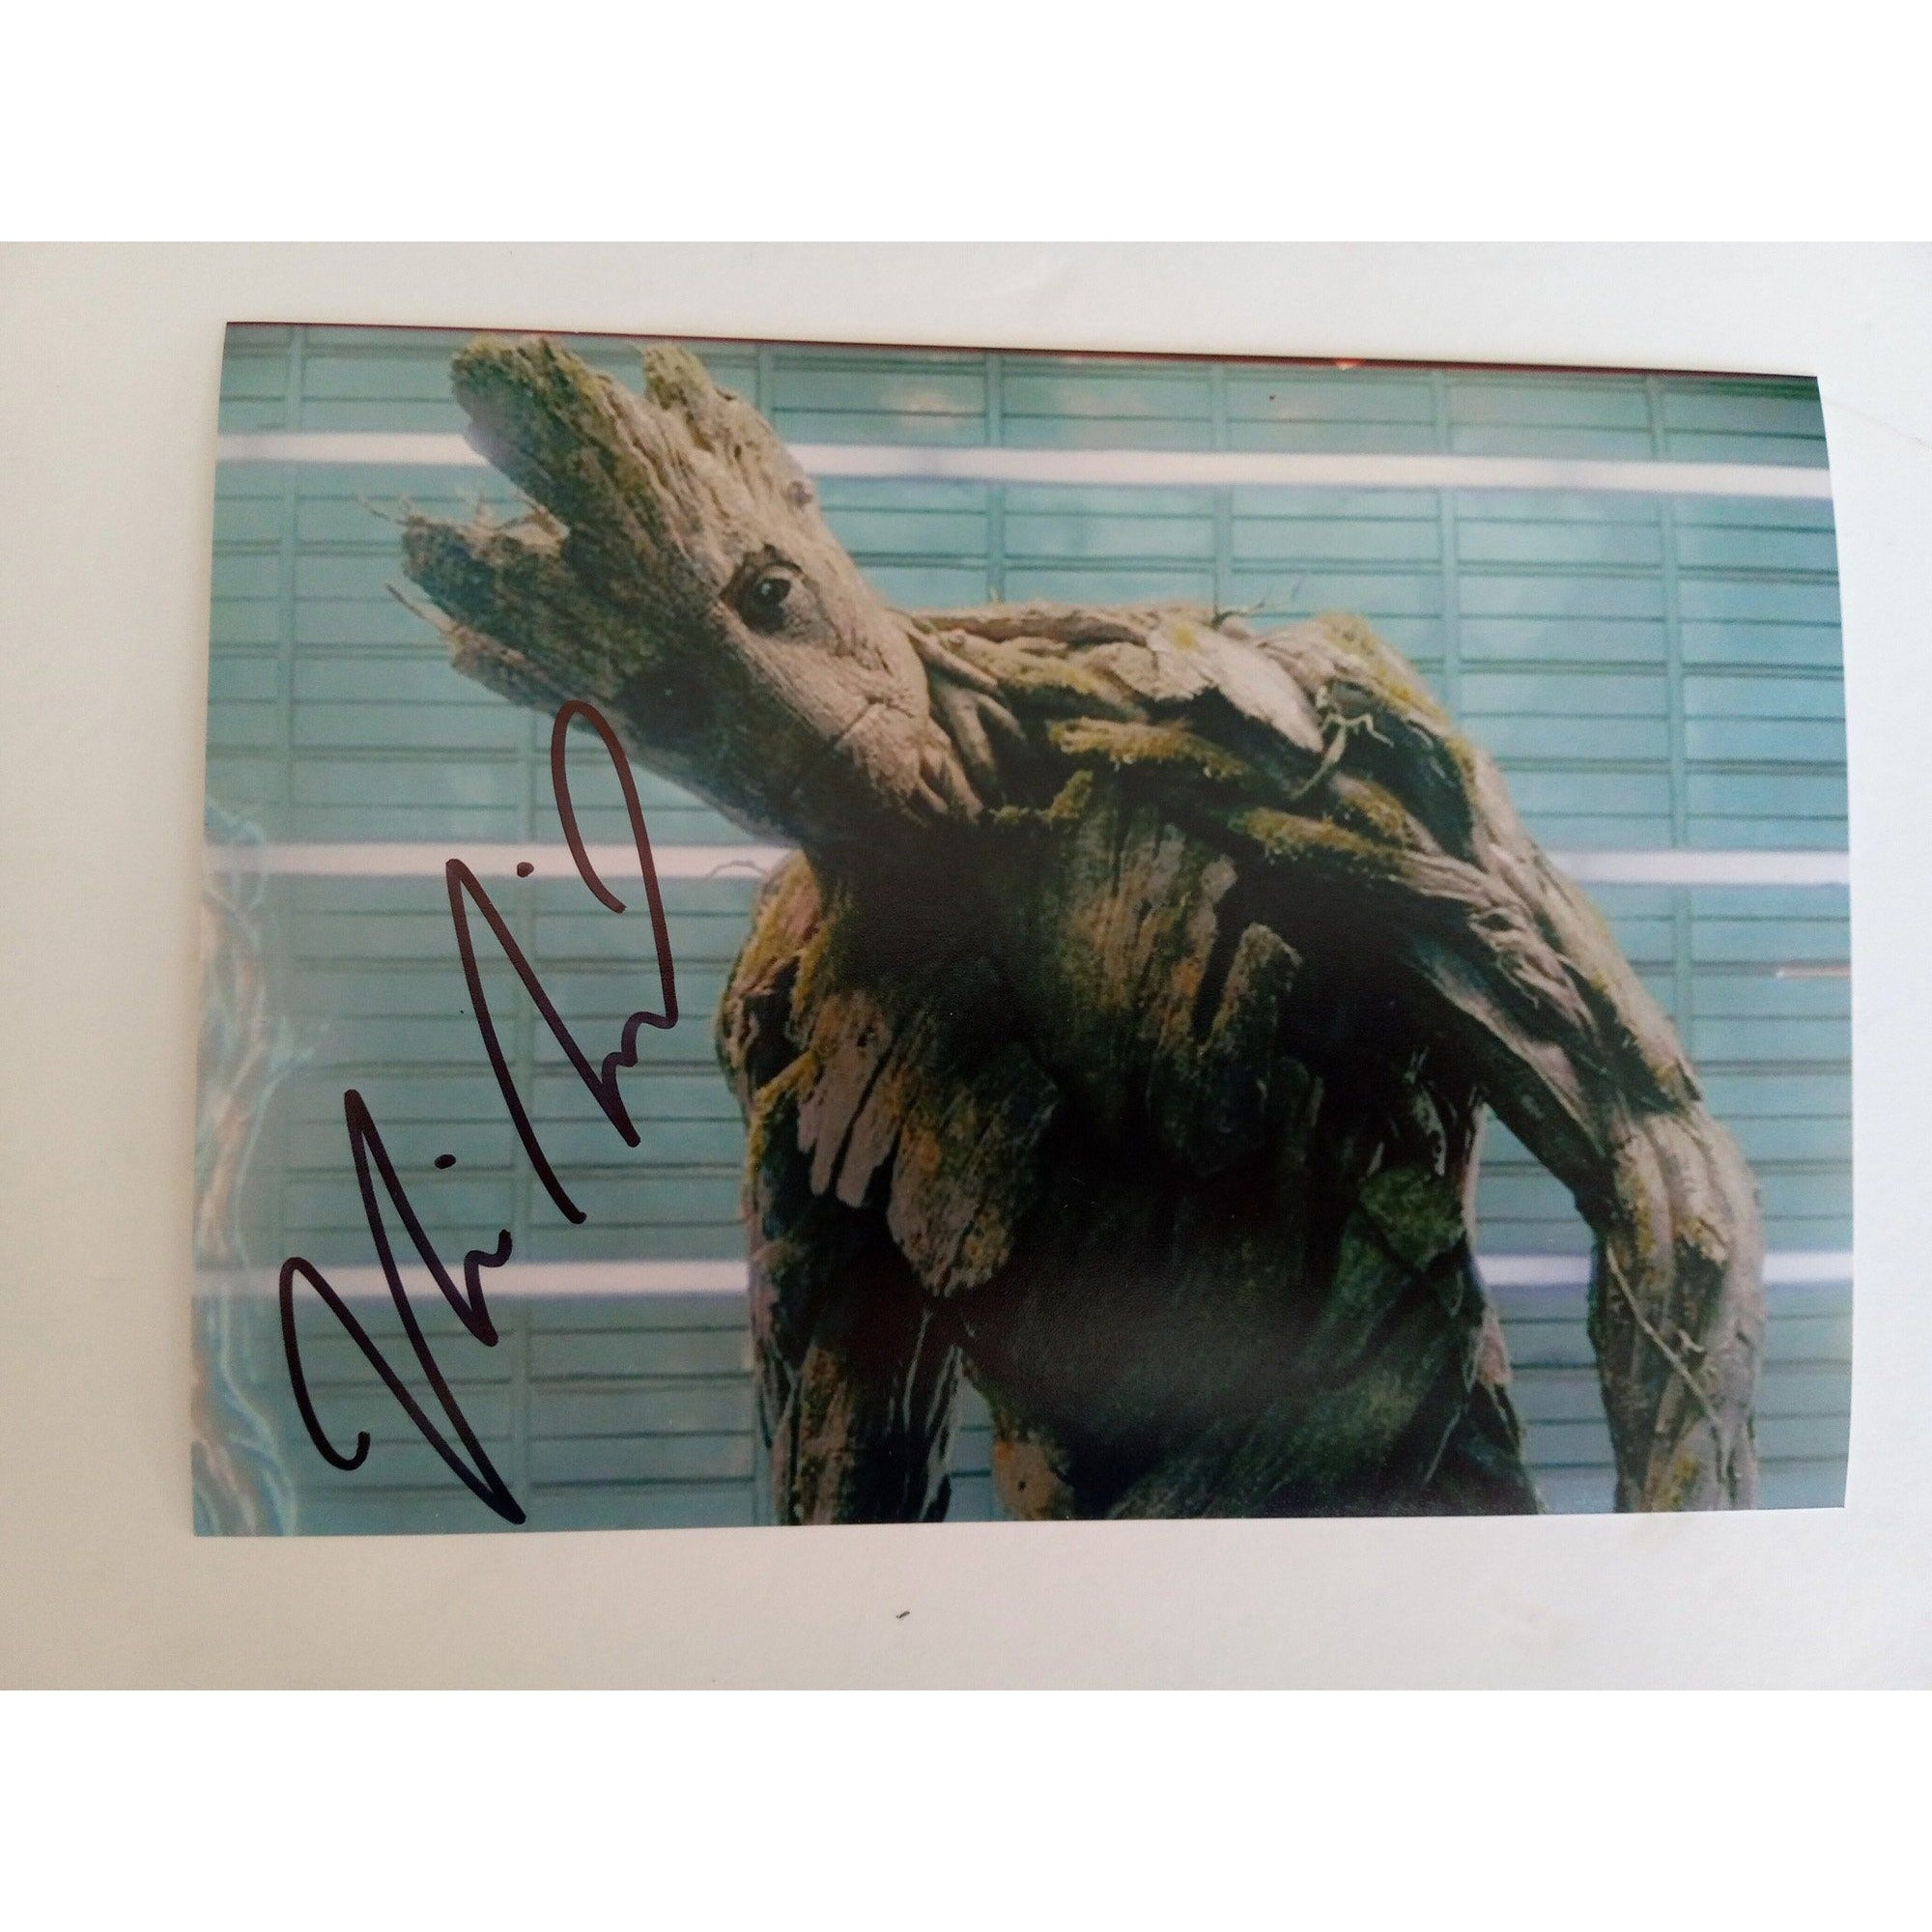 Vin Diesel Guardians of the Galaxy 5 x 7 photo sign with proof